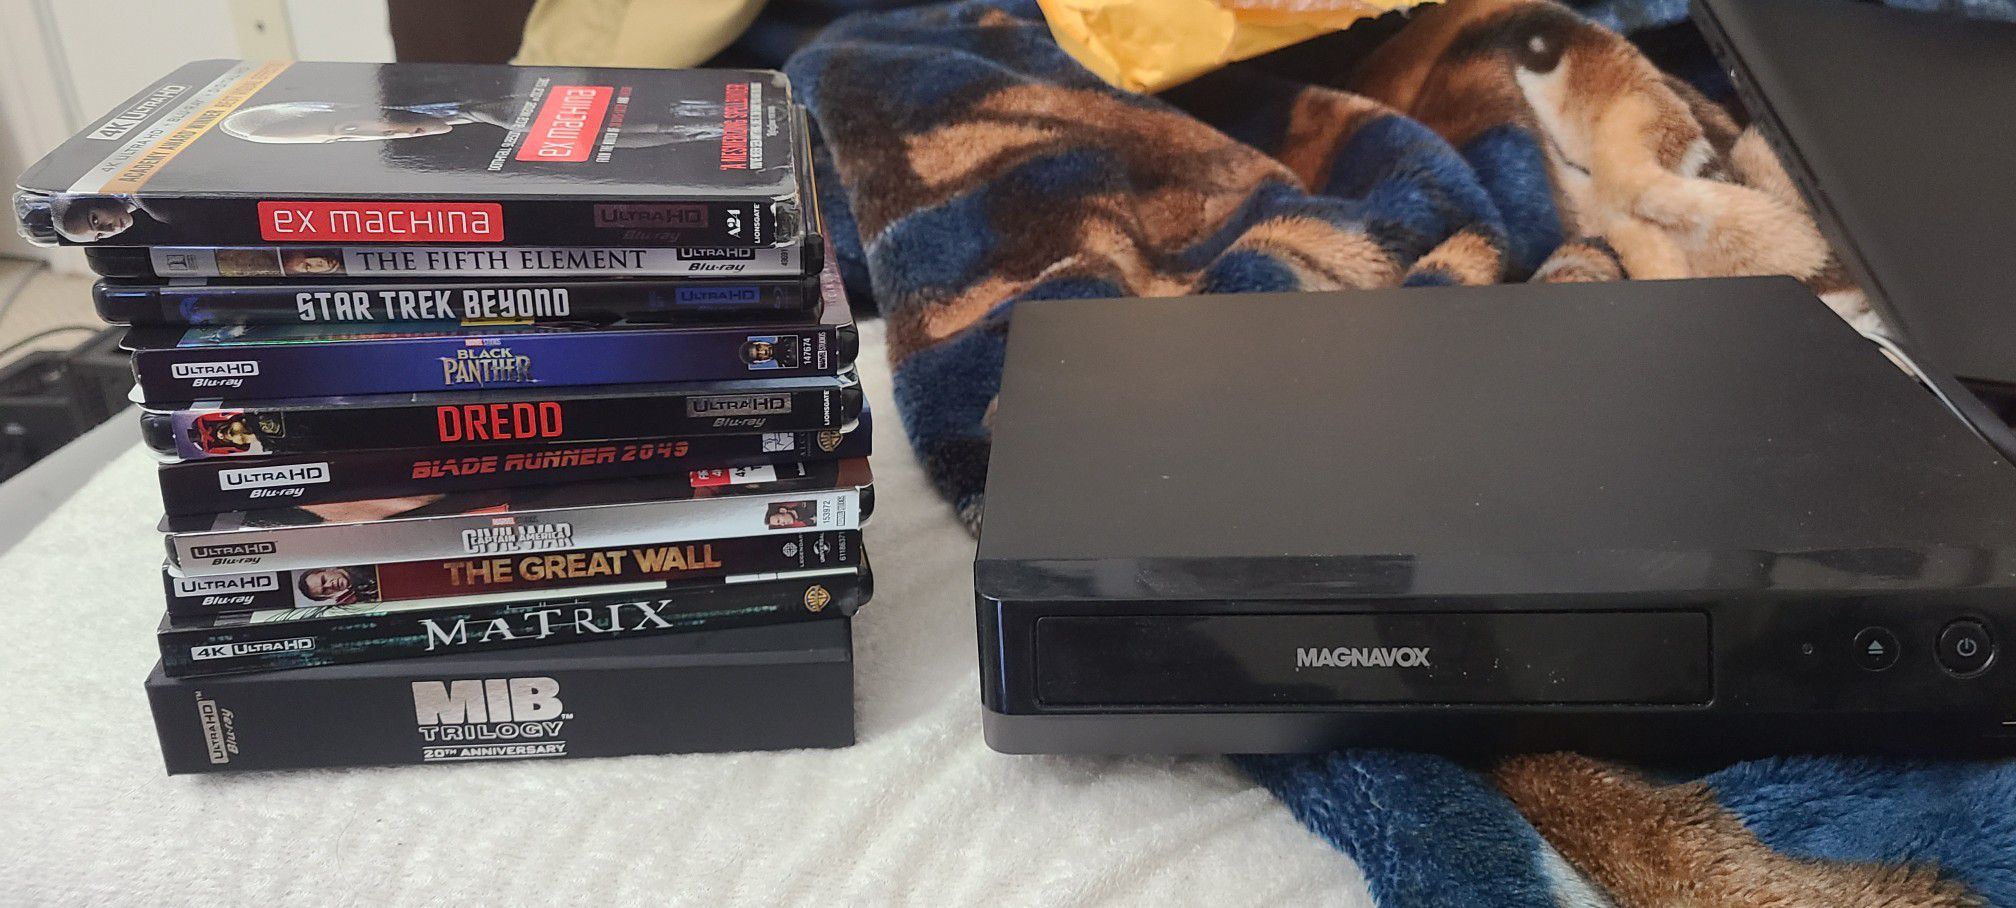 Magnavox 4k player and movie lot